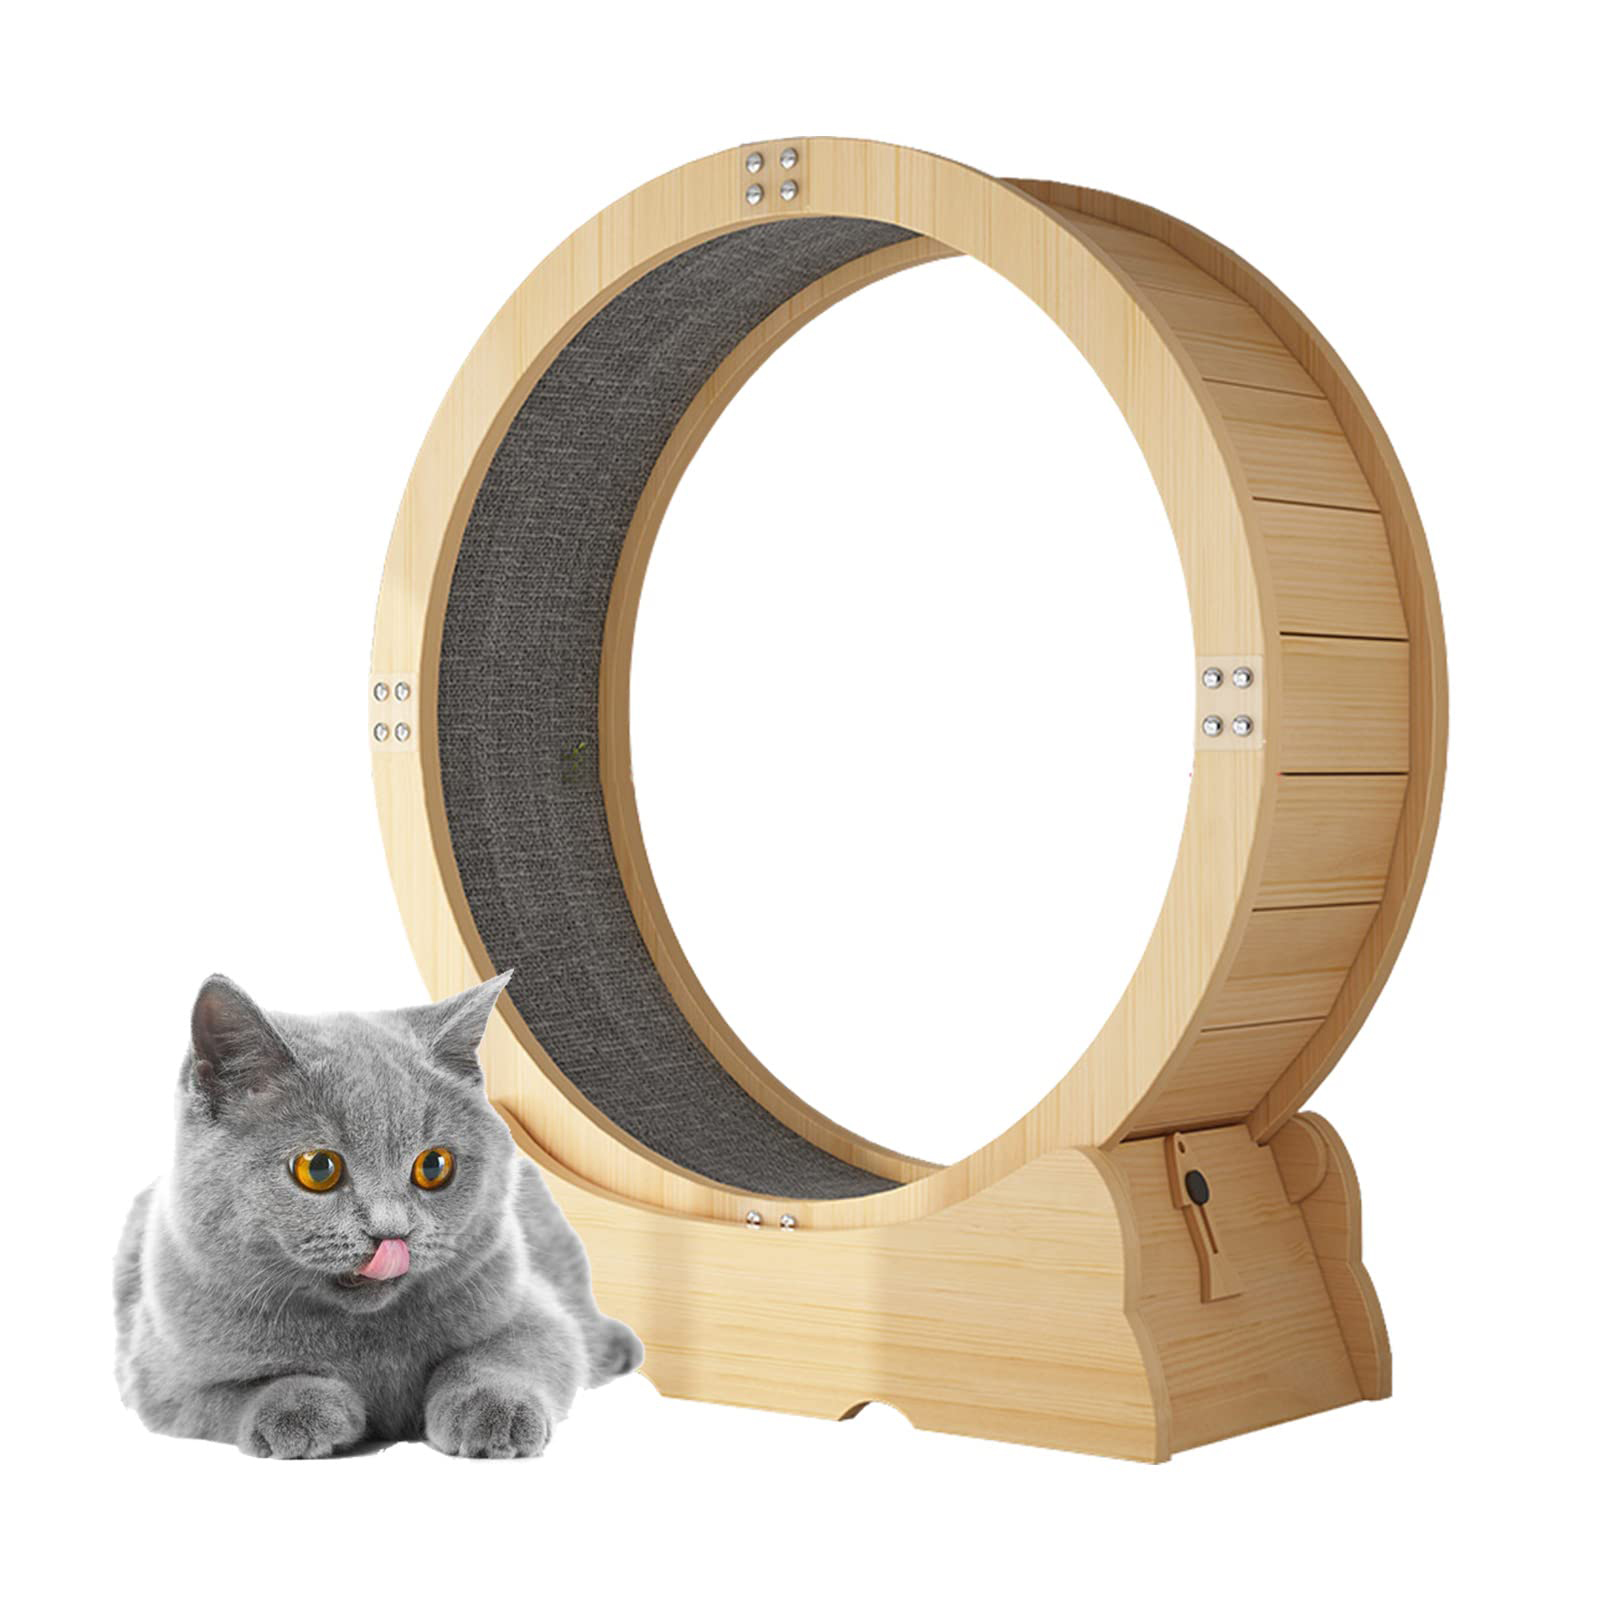 Pet items large size solid wood silent treadmill cat wheel cat running wheel exercise for 1.5cm wood board